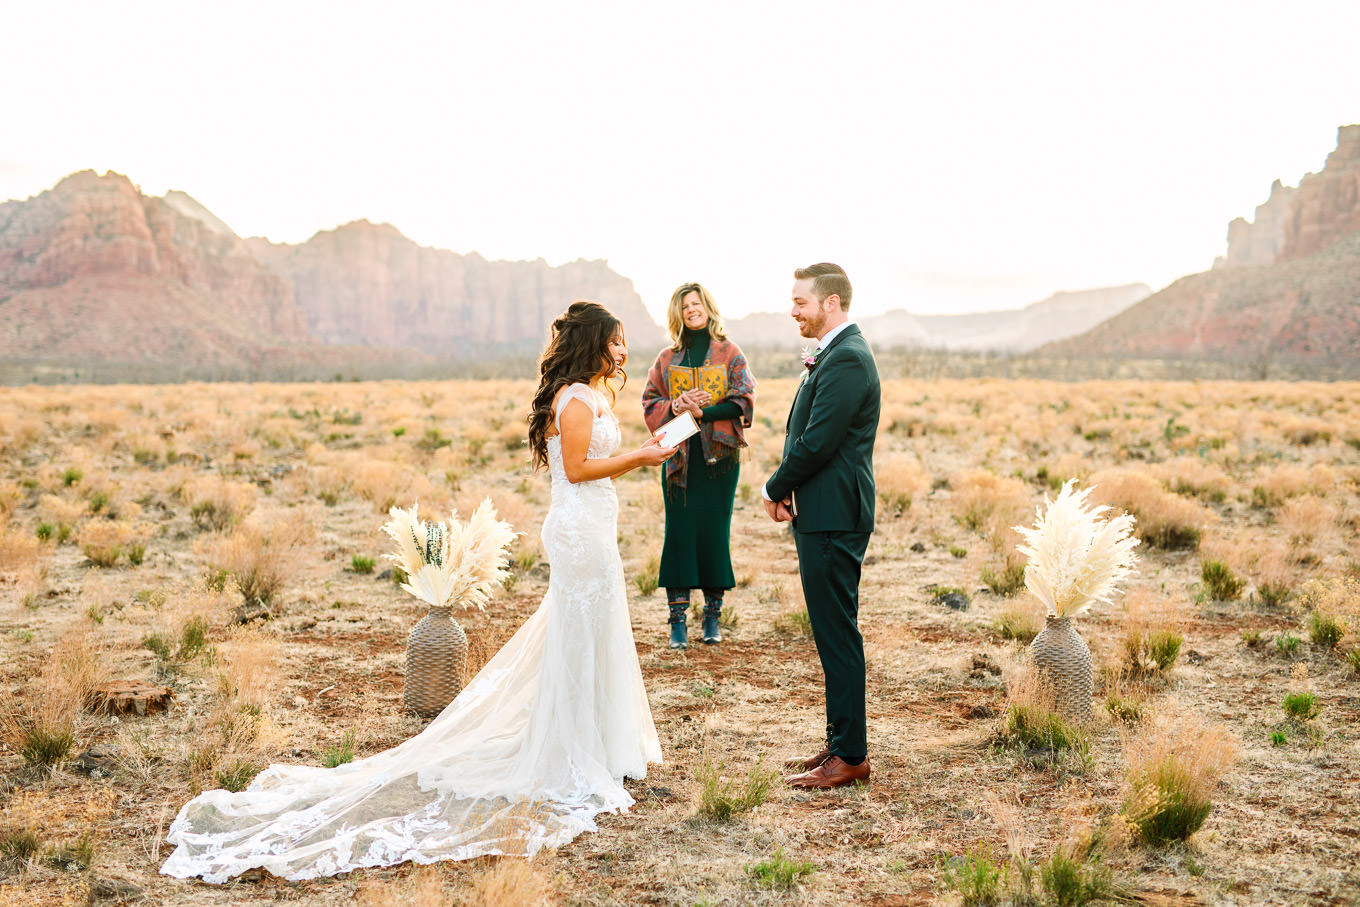 Bride reading vows | Zion Under Canvas camping elopement at sunrise | Colorful elopement photography | #utahelopement #zionelopement #zionwedding #undercanvaszion #sunriseelopement #adventureelopement  Source: Mary Costa Photography | Los Angeles